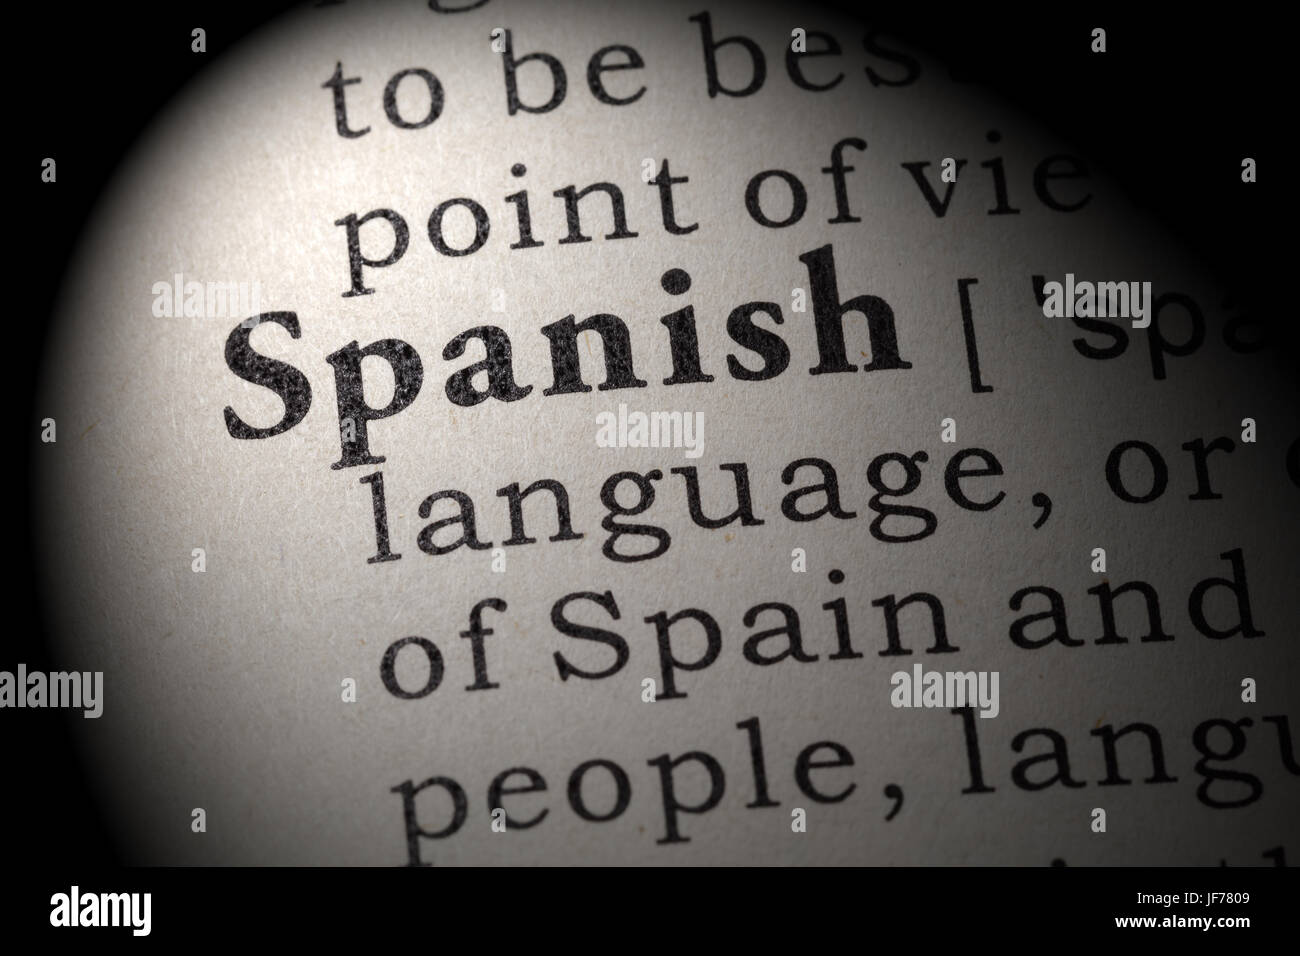 Fake Dictionary, Dictionary definition of the word Spanish. including key descriptive words. Stock Photo